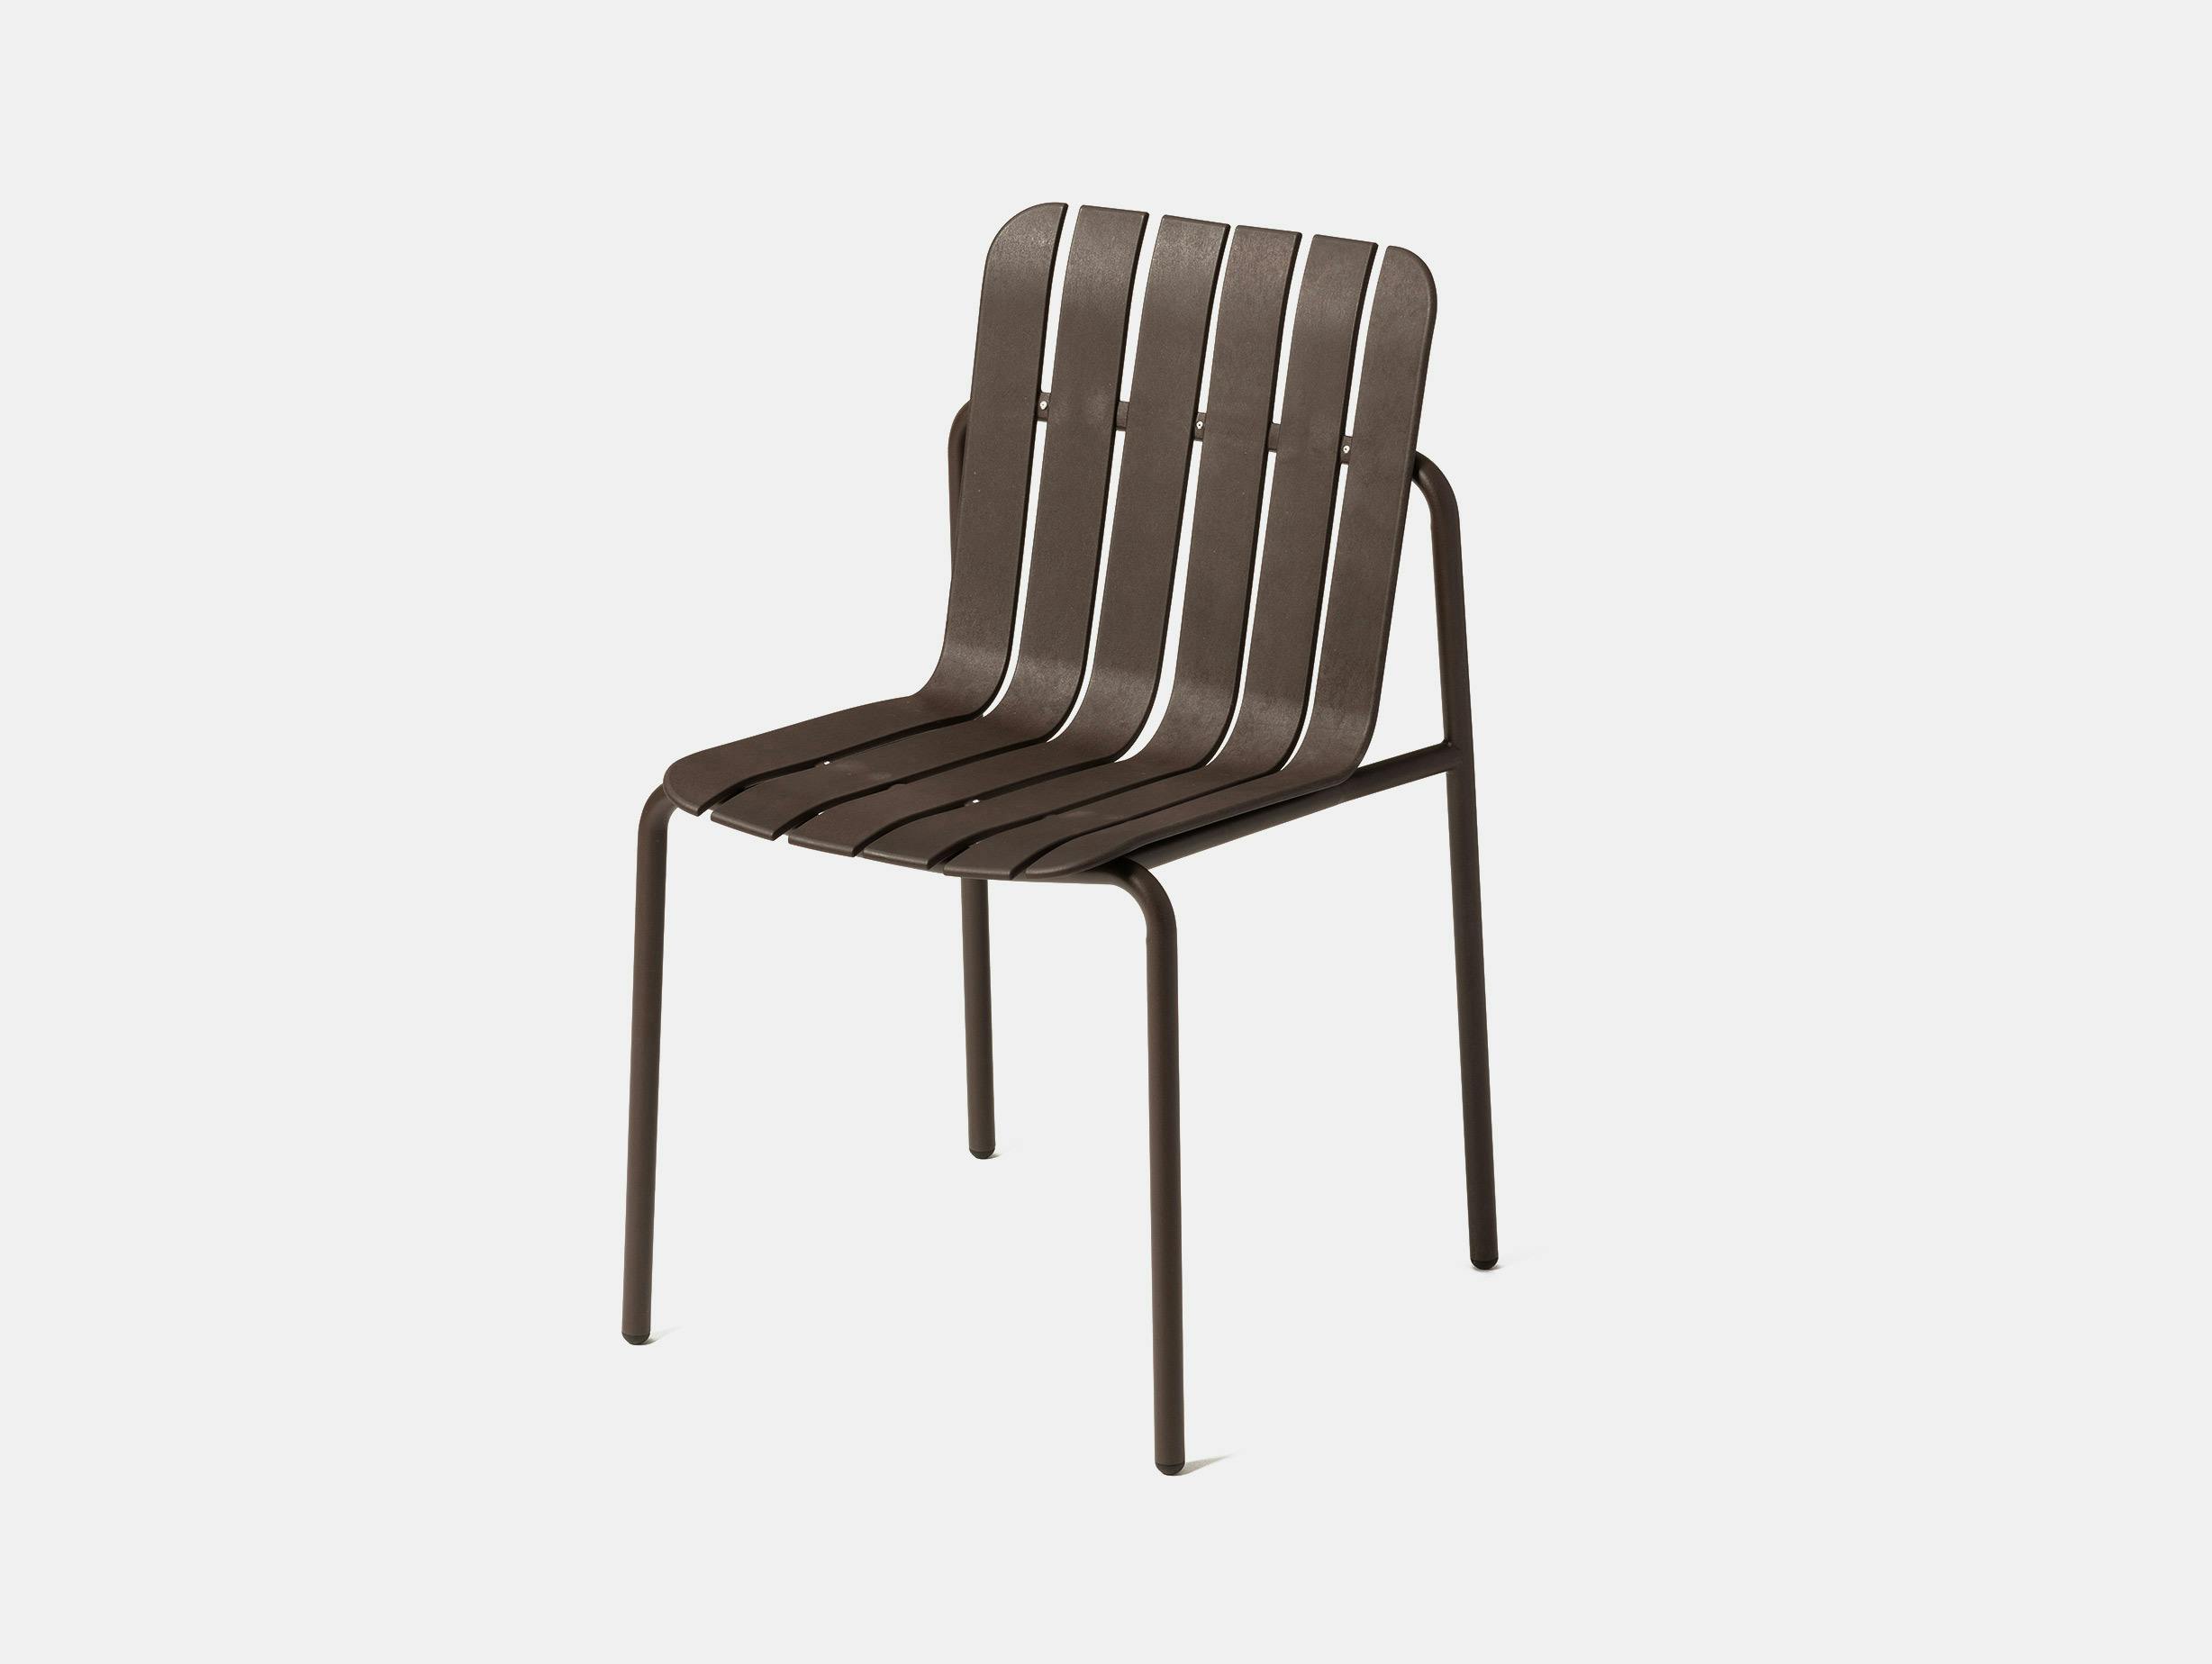 Very good and proper ac al latte chair grey brown no arms2